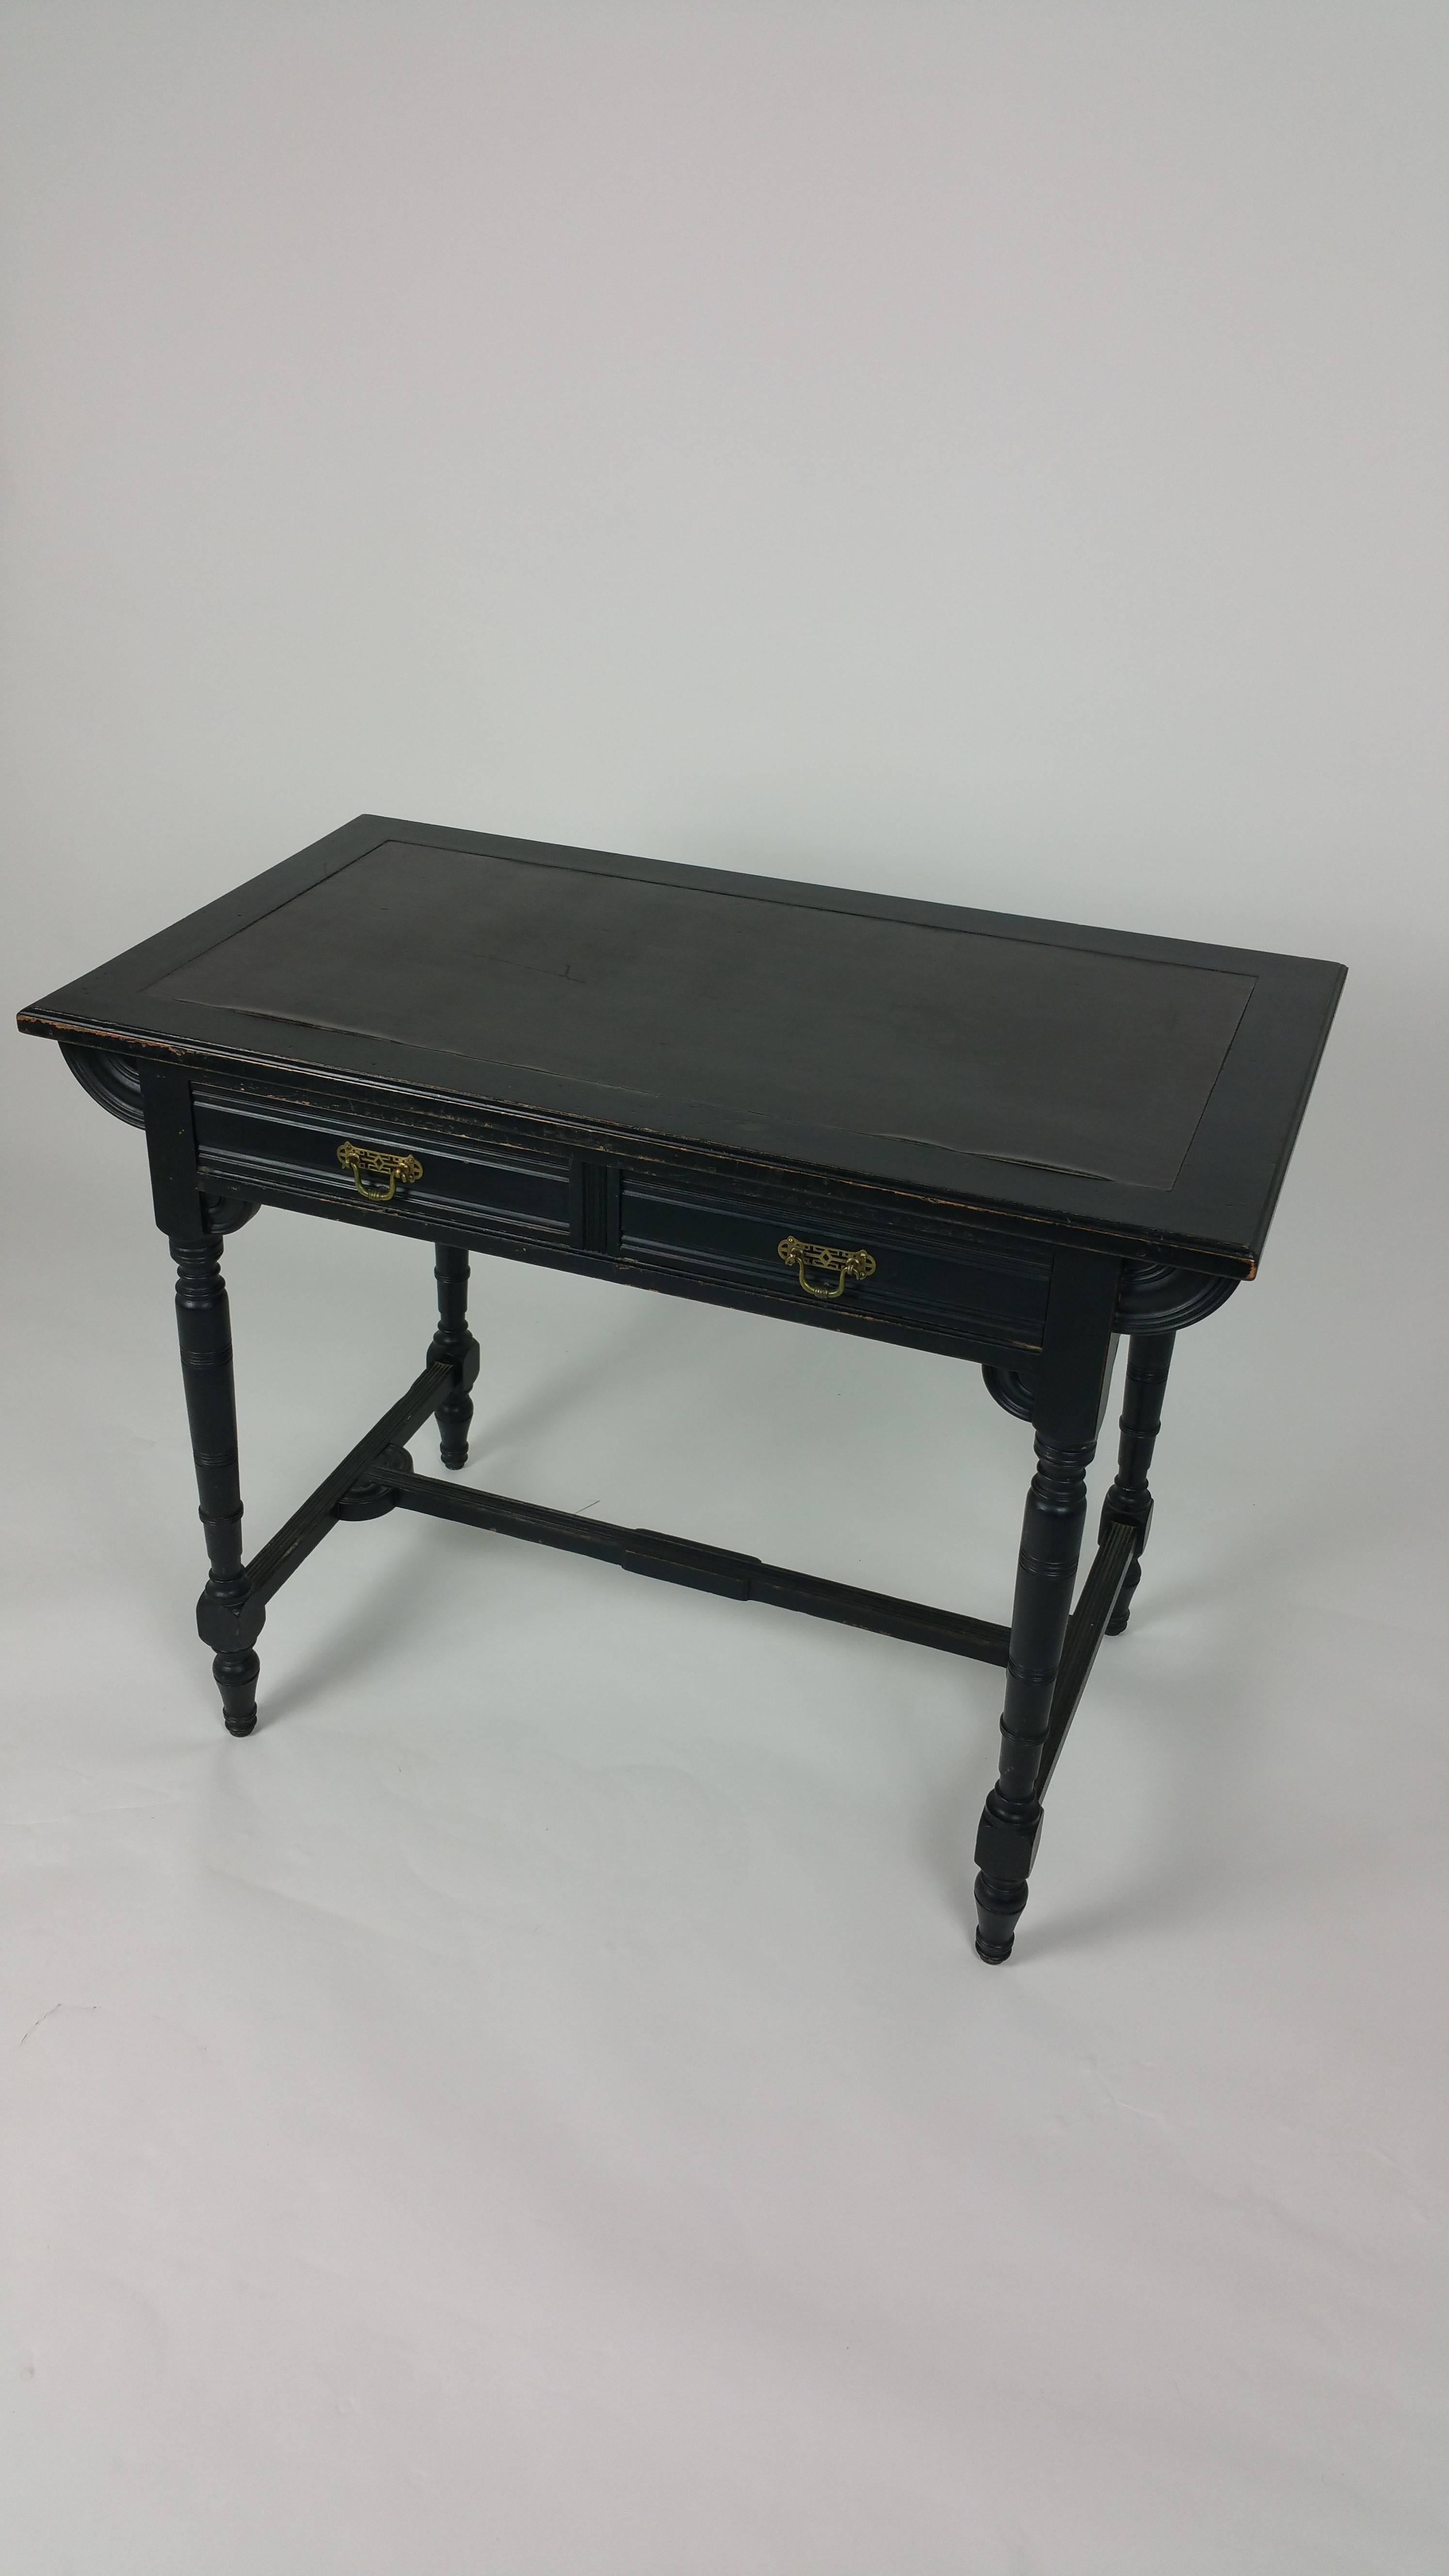 This marvelous and well-proportioned 19th century Art & Crafts Aesthetic movement ebonized mahogany writing table features two slender top drawers with the original brass handles and original condition throughout. It measures 36 in – 91.5 cm wide,